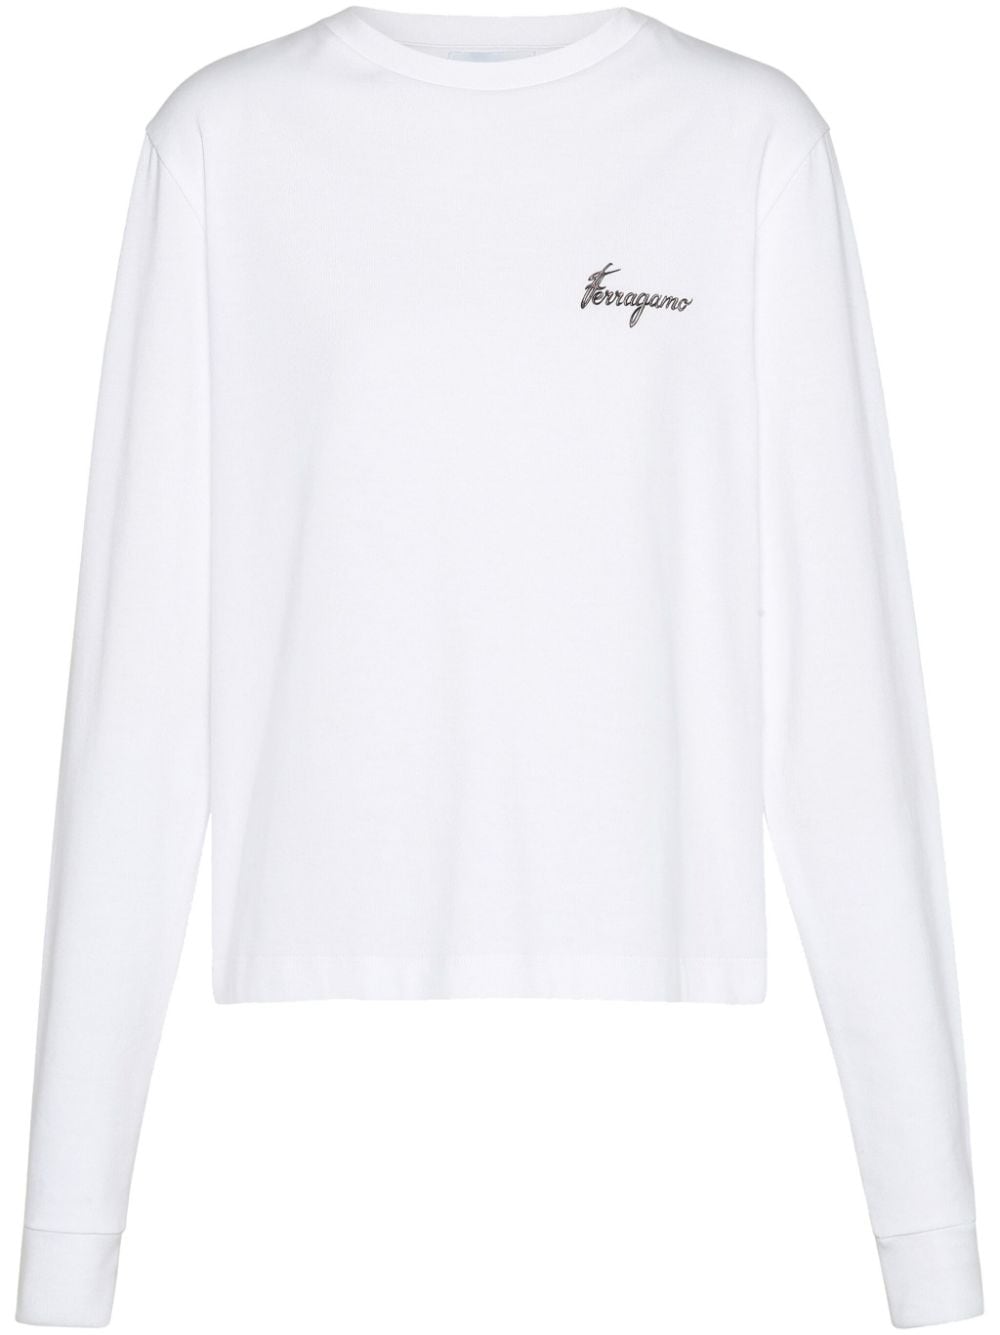 Ferragamo Woman Long Sleeved T-shirt With Botanical Print In Multicolor